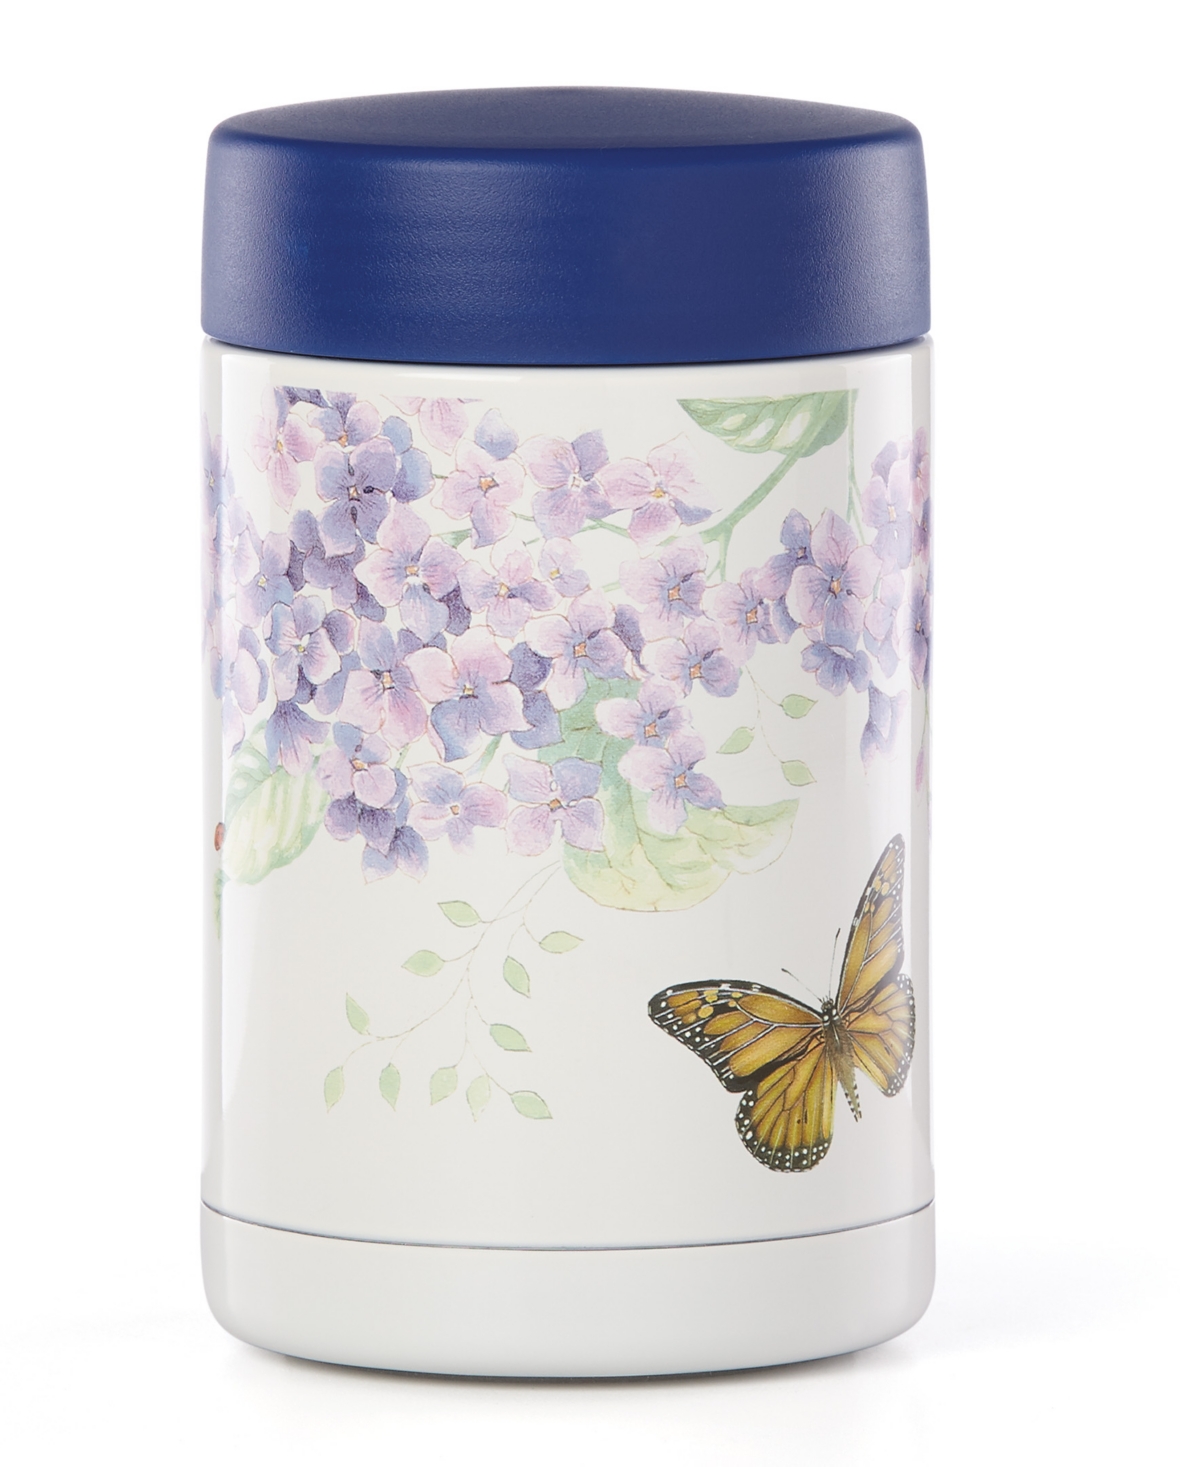 LENOX BUTTERFLY MEADOW KITCHEN LARGE INSULATED FOOD CONTAINER, CREATED FOR MACY'S